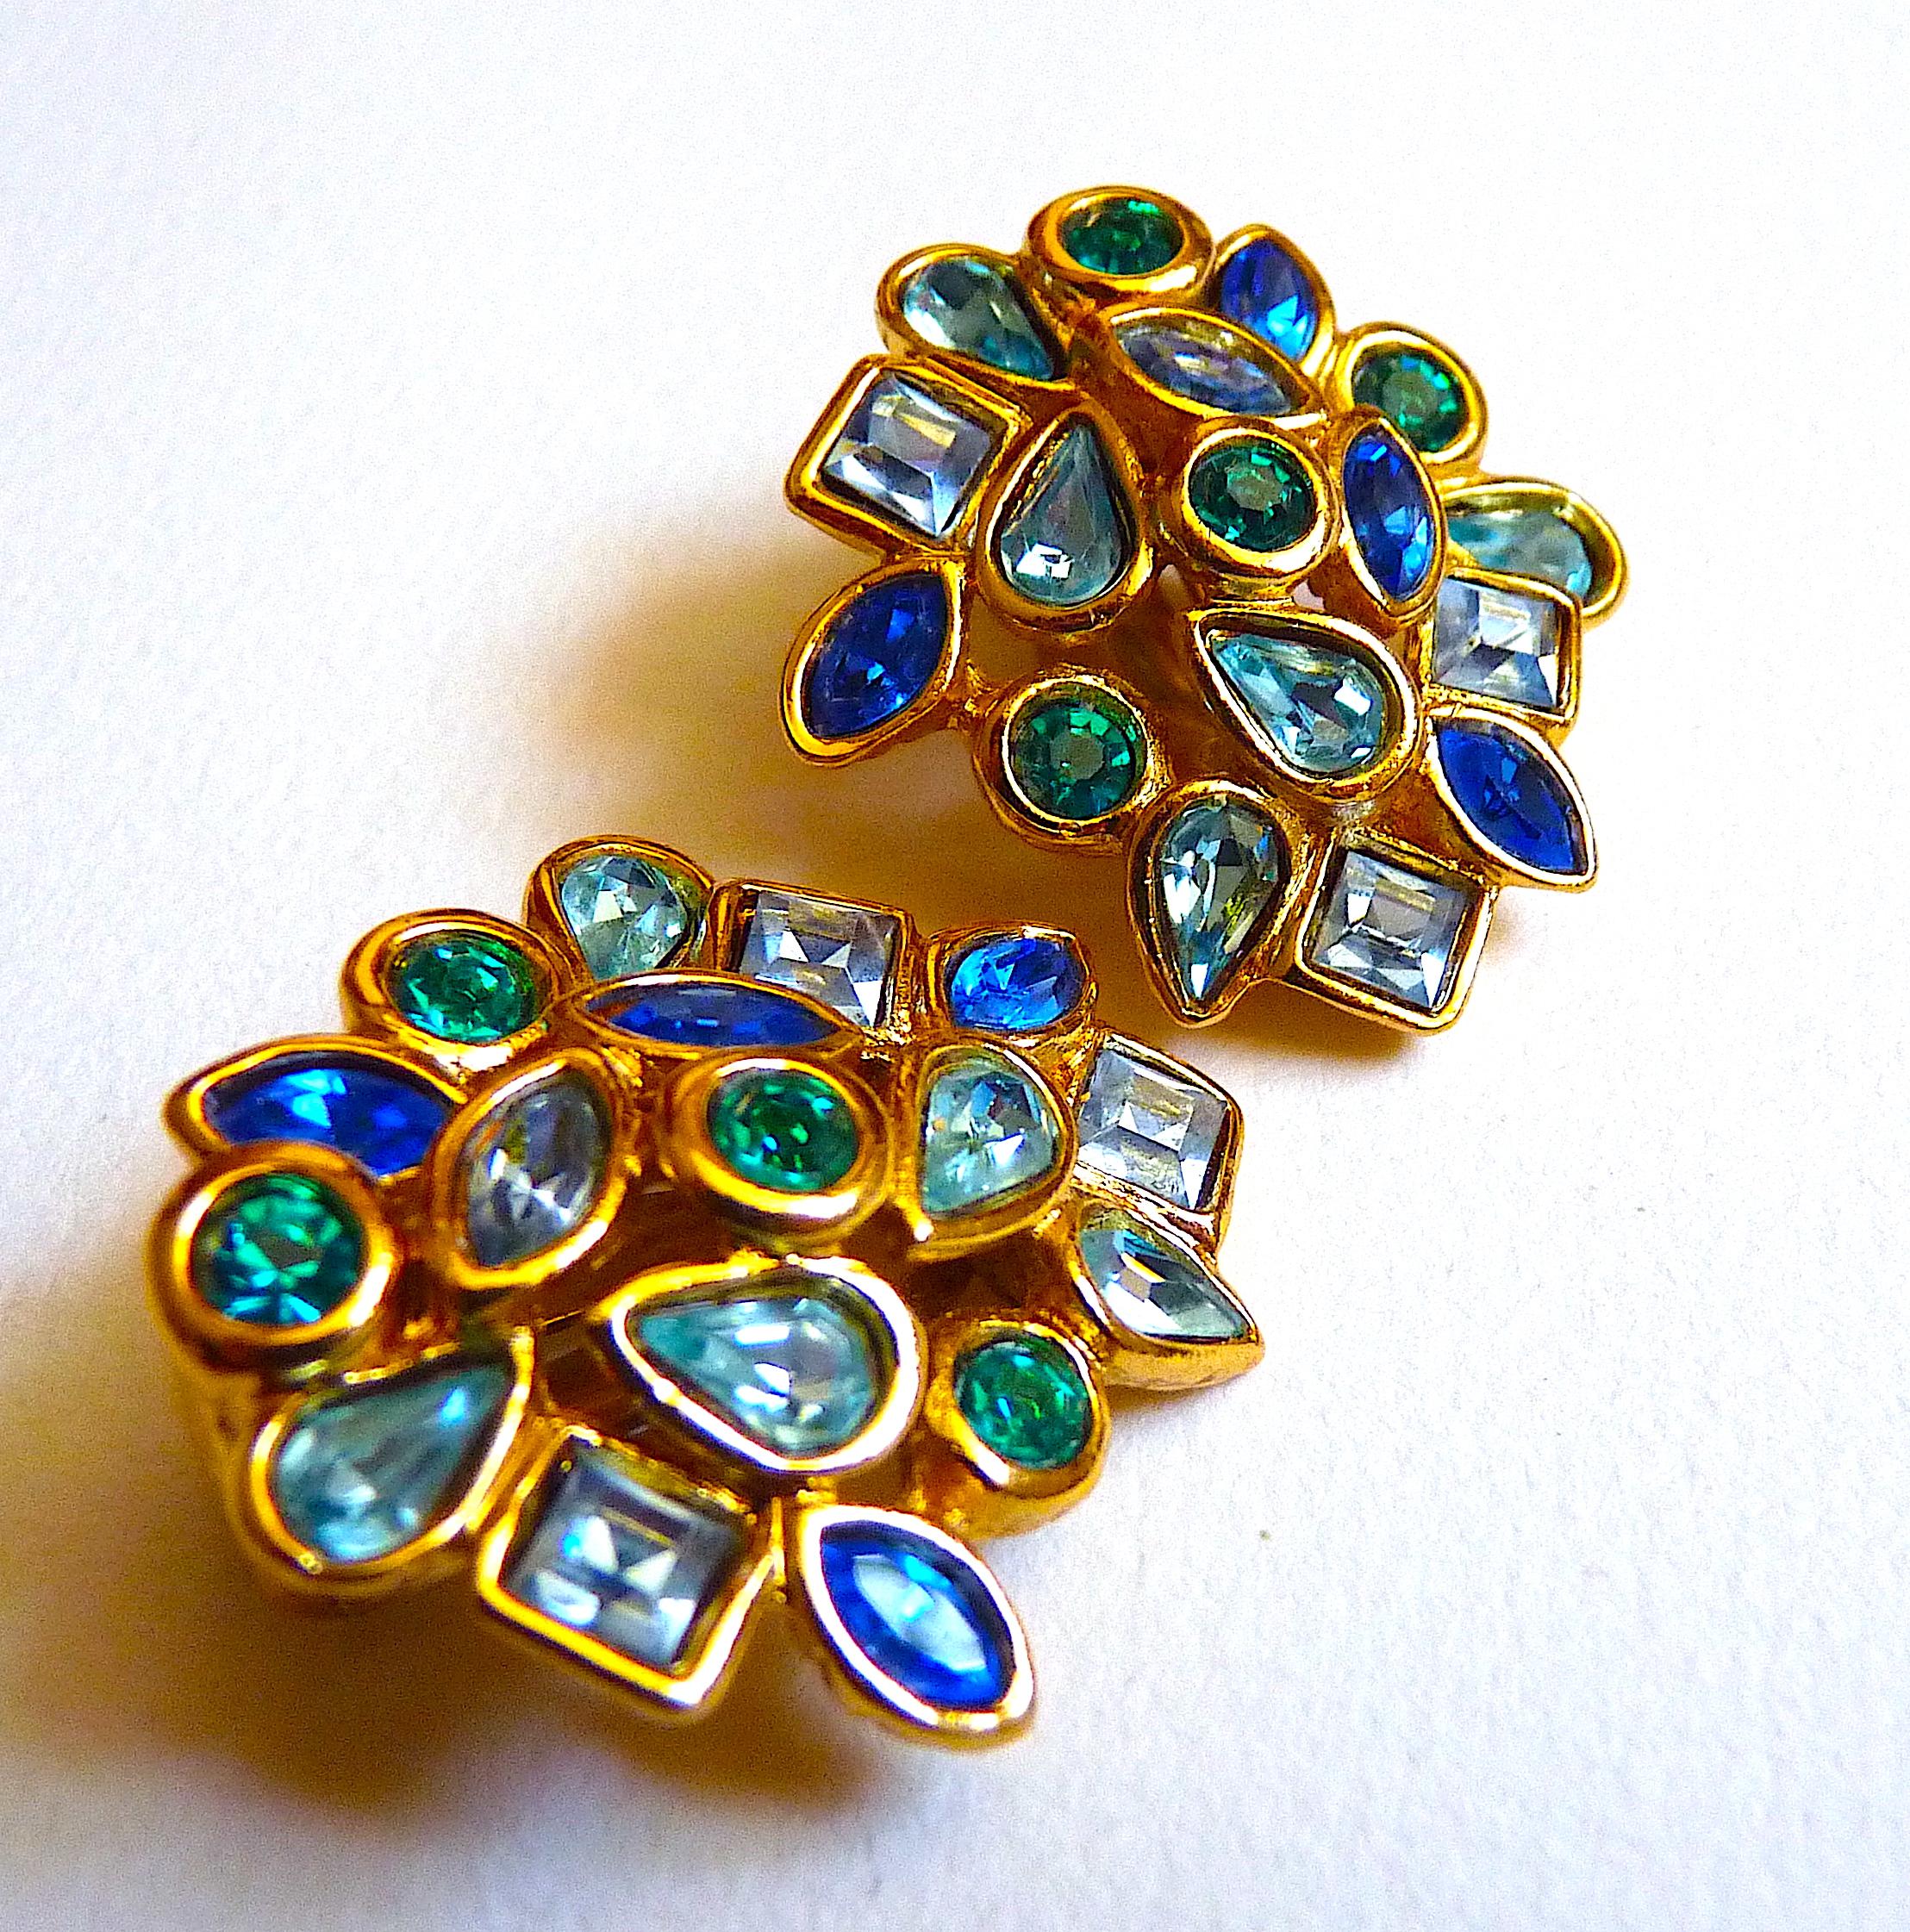 YVES SAINT LAURENT Clip On Earrings, Amazing Vintage Blue and Green Swarovski Crystals in a Gold Tone Metal Openwork

- Gold Tone Metal and Blue, Green Swarovski Crystal Cabochons

- Signed YSL Made in France at Back

- Stunning Christmas Gift Idea